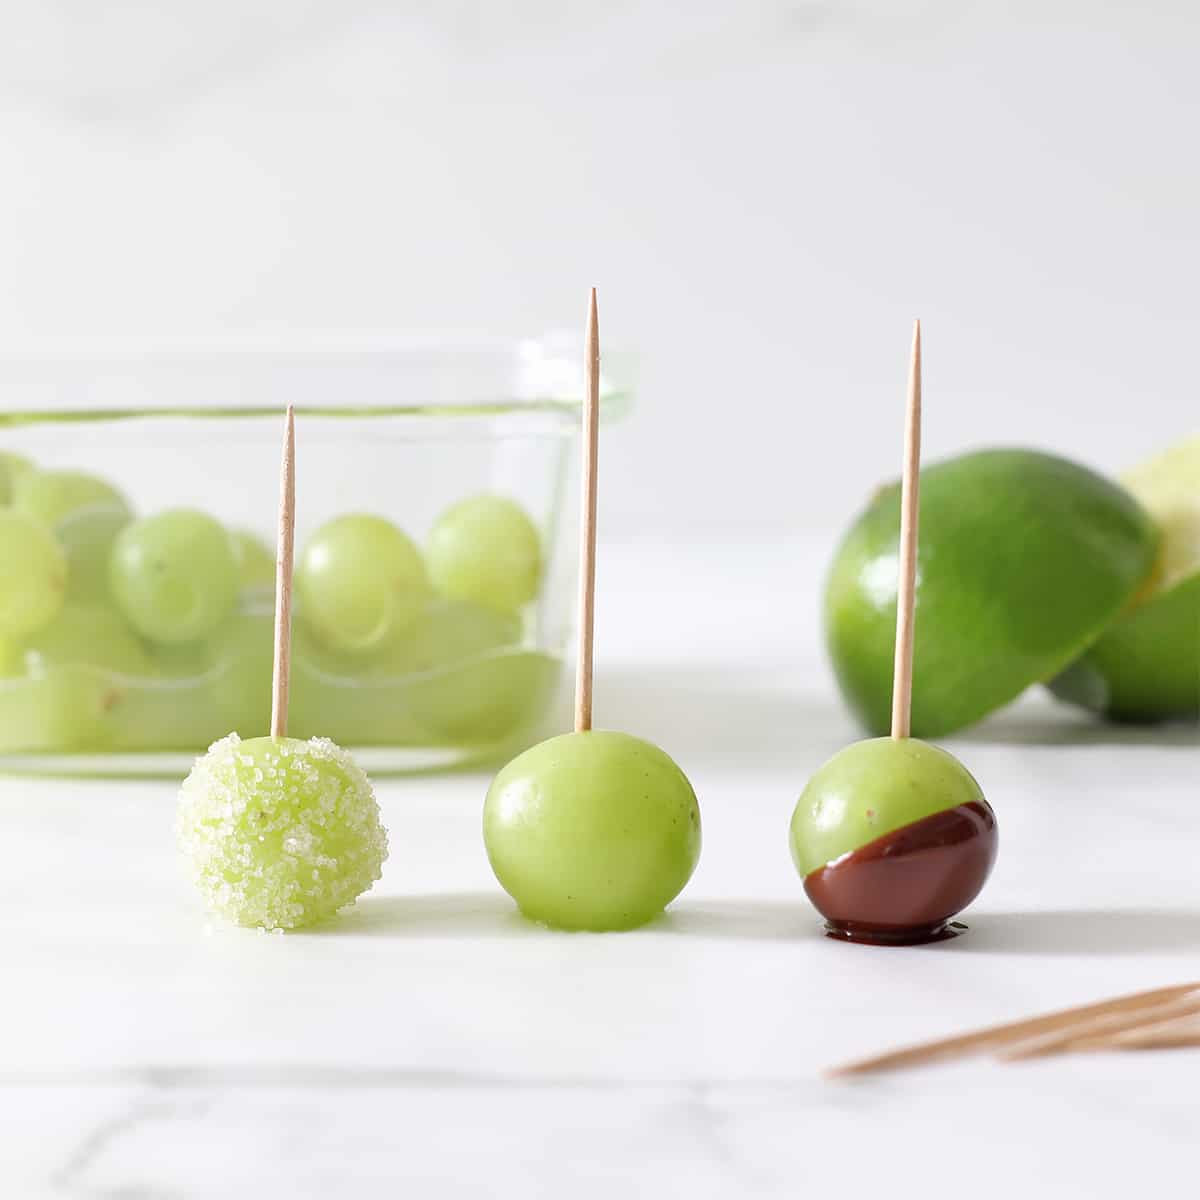 frozen grapes variations, one sugared, one limed, one chocolate layer.